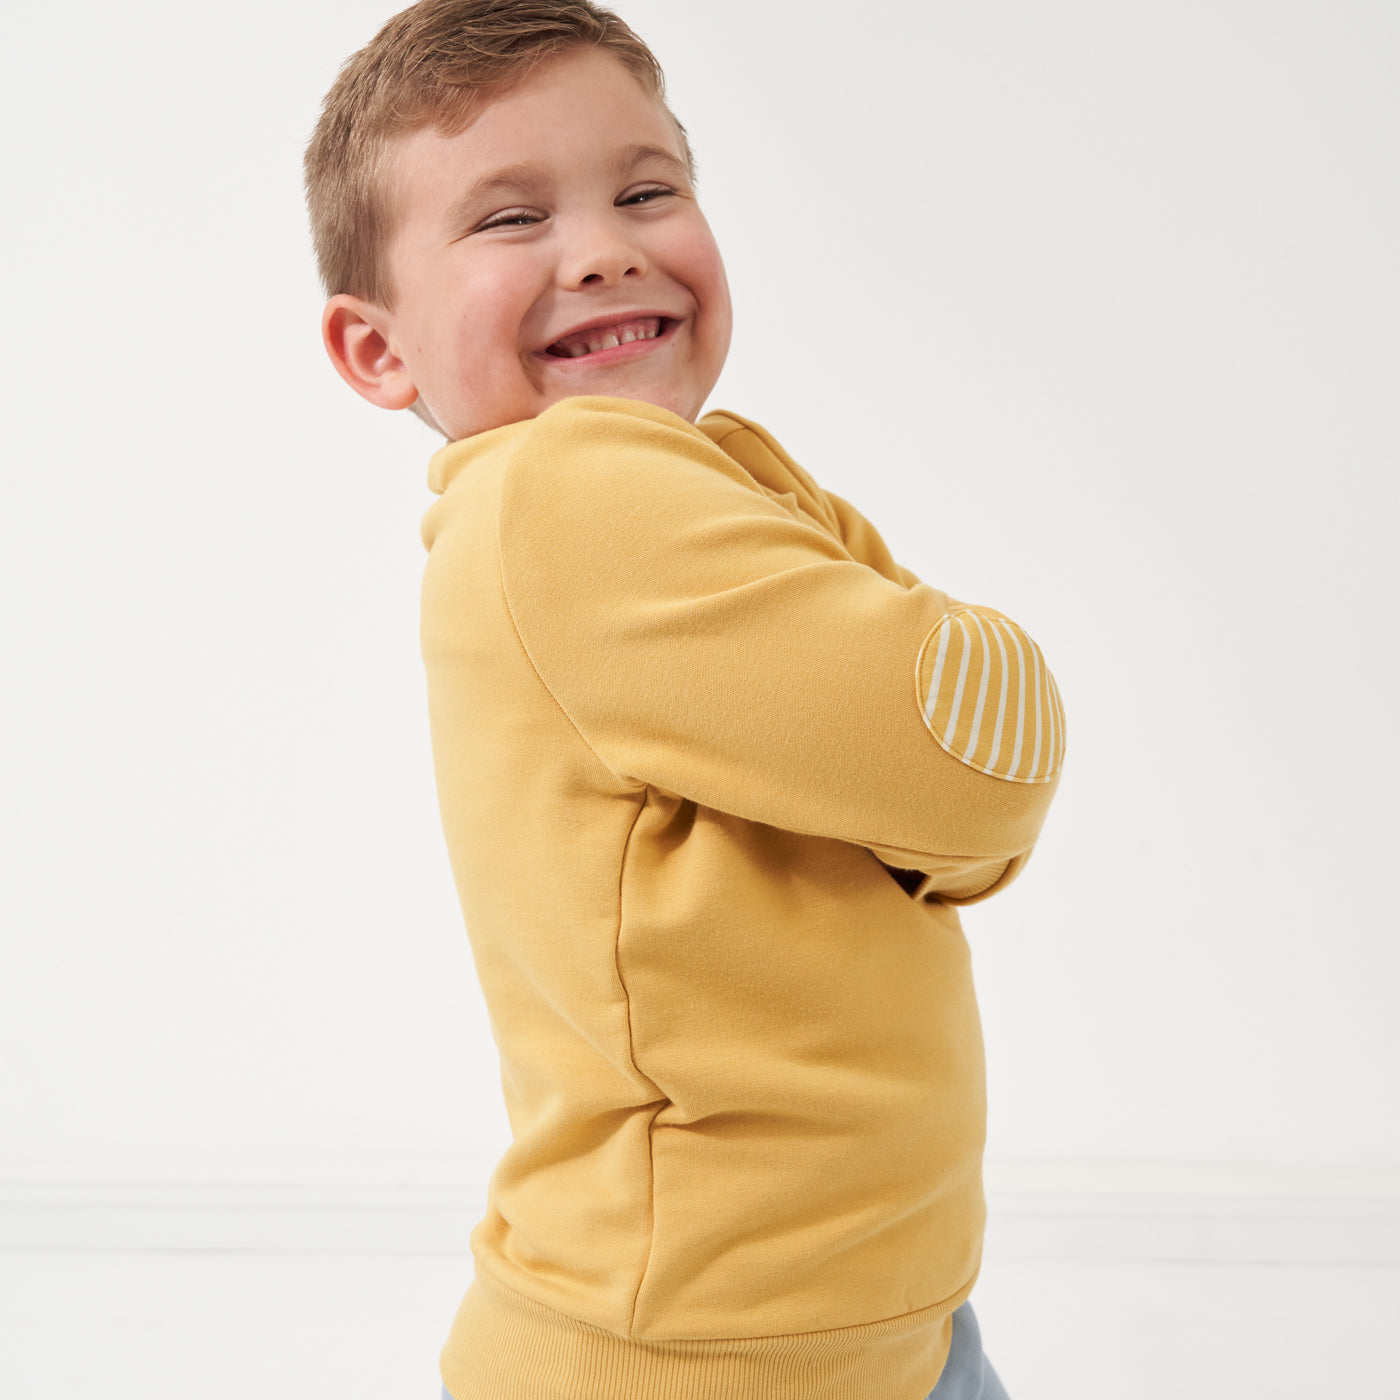 Child wearing a Honey elbow patch crewneck showing the elbow patch